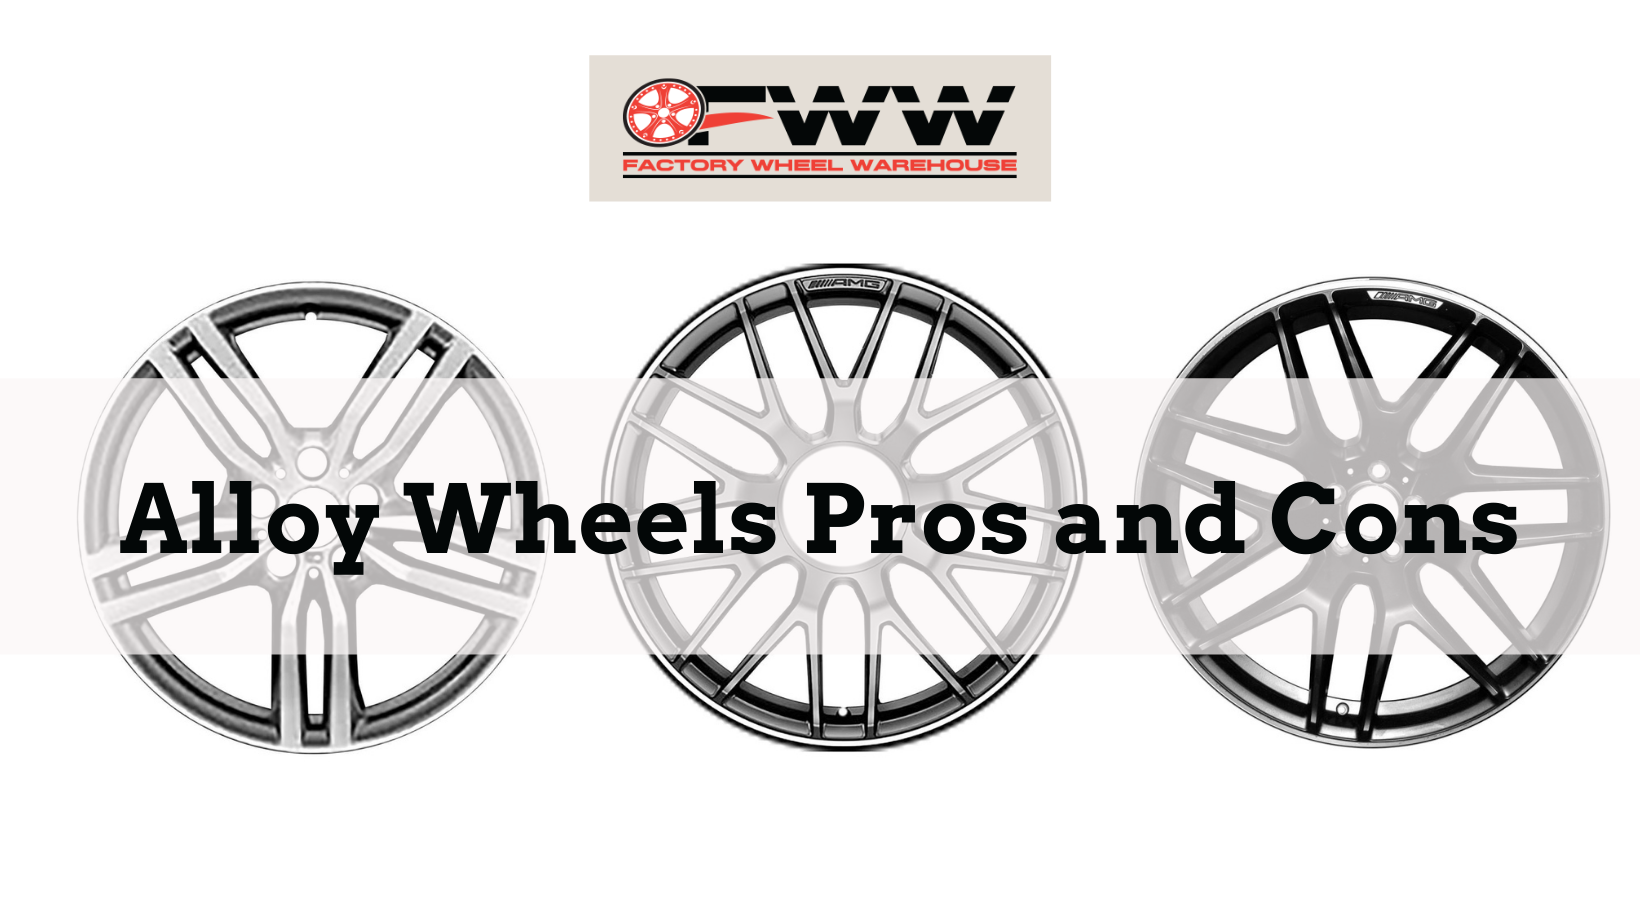 Alloy Wheels: Pros and Cons